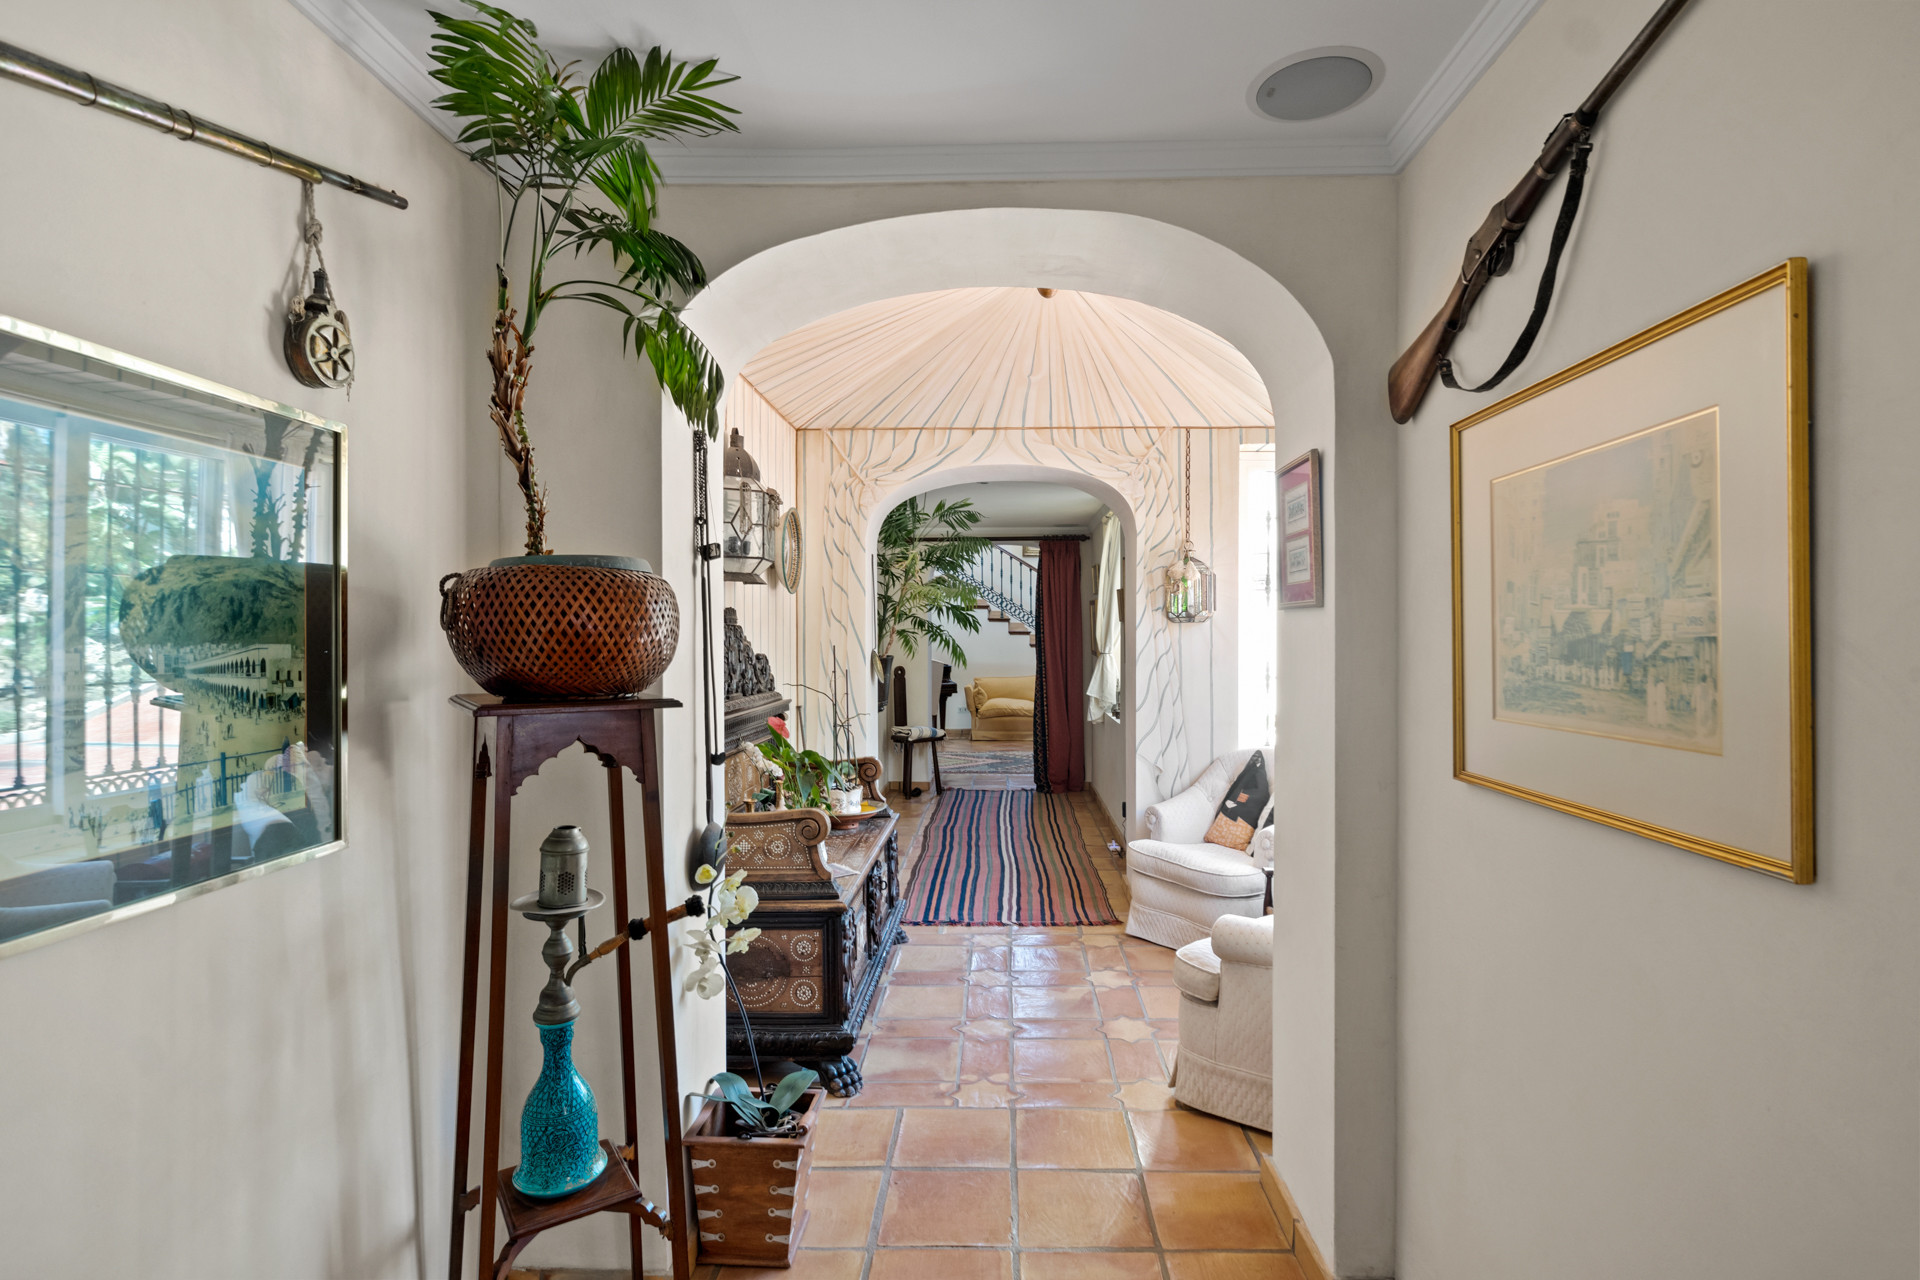 Traditional villa situated within the Marbella Club Golf Resort, Benahavís.